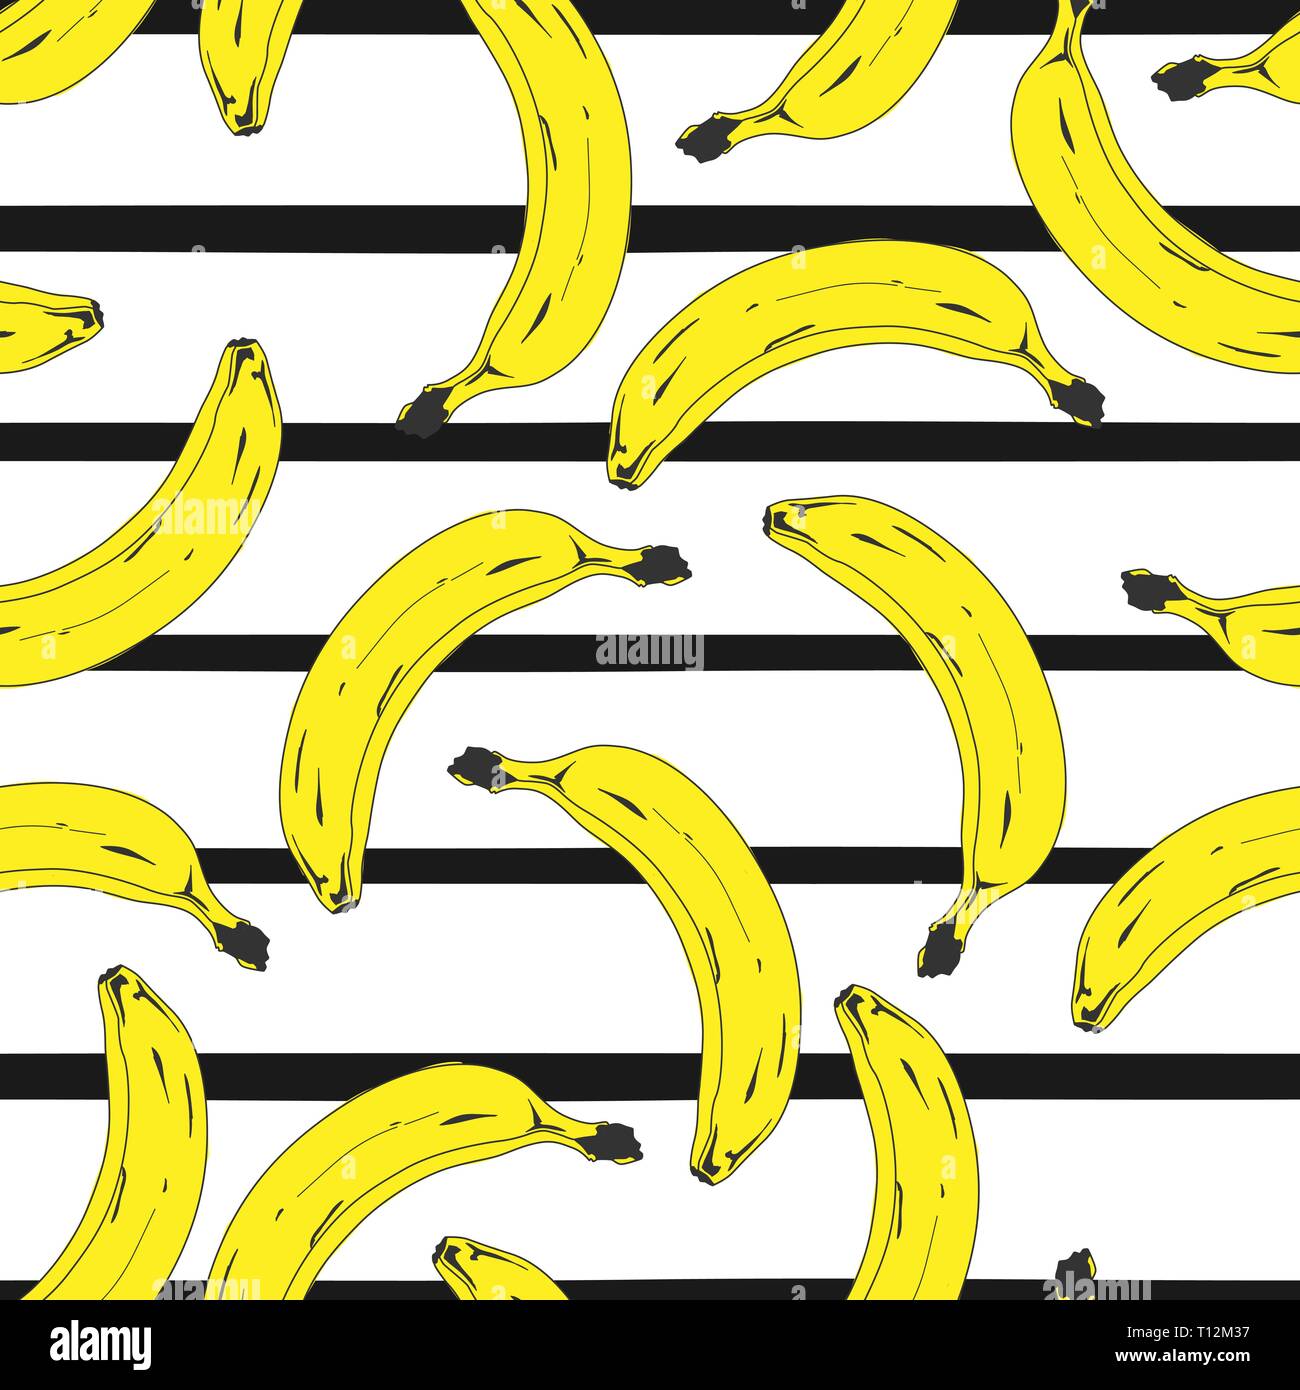 Seamless pop art banana pattern randomly distributed on color background. Stripped or dotted background. Vector Illustration. Stock Vector